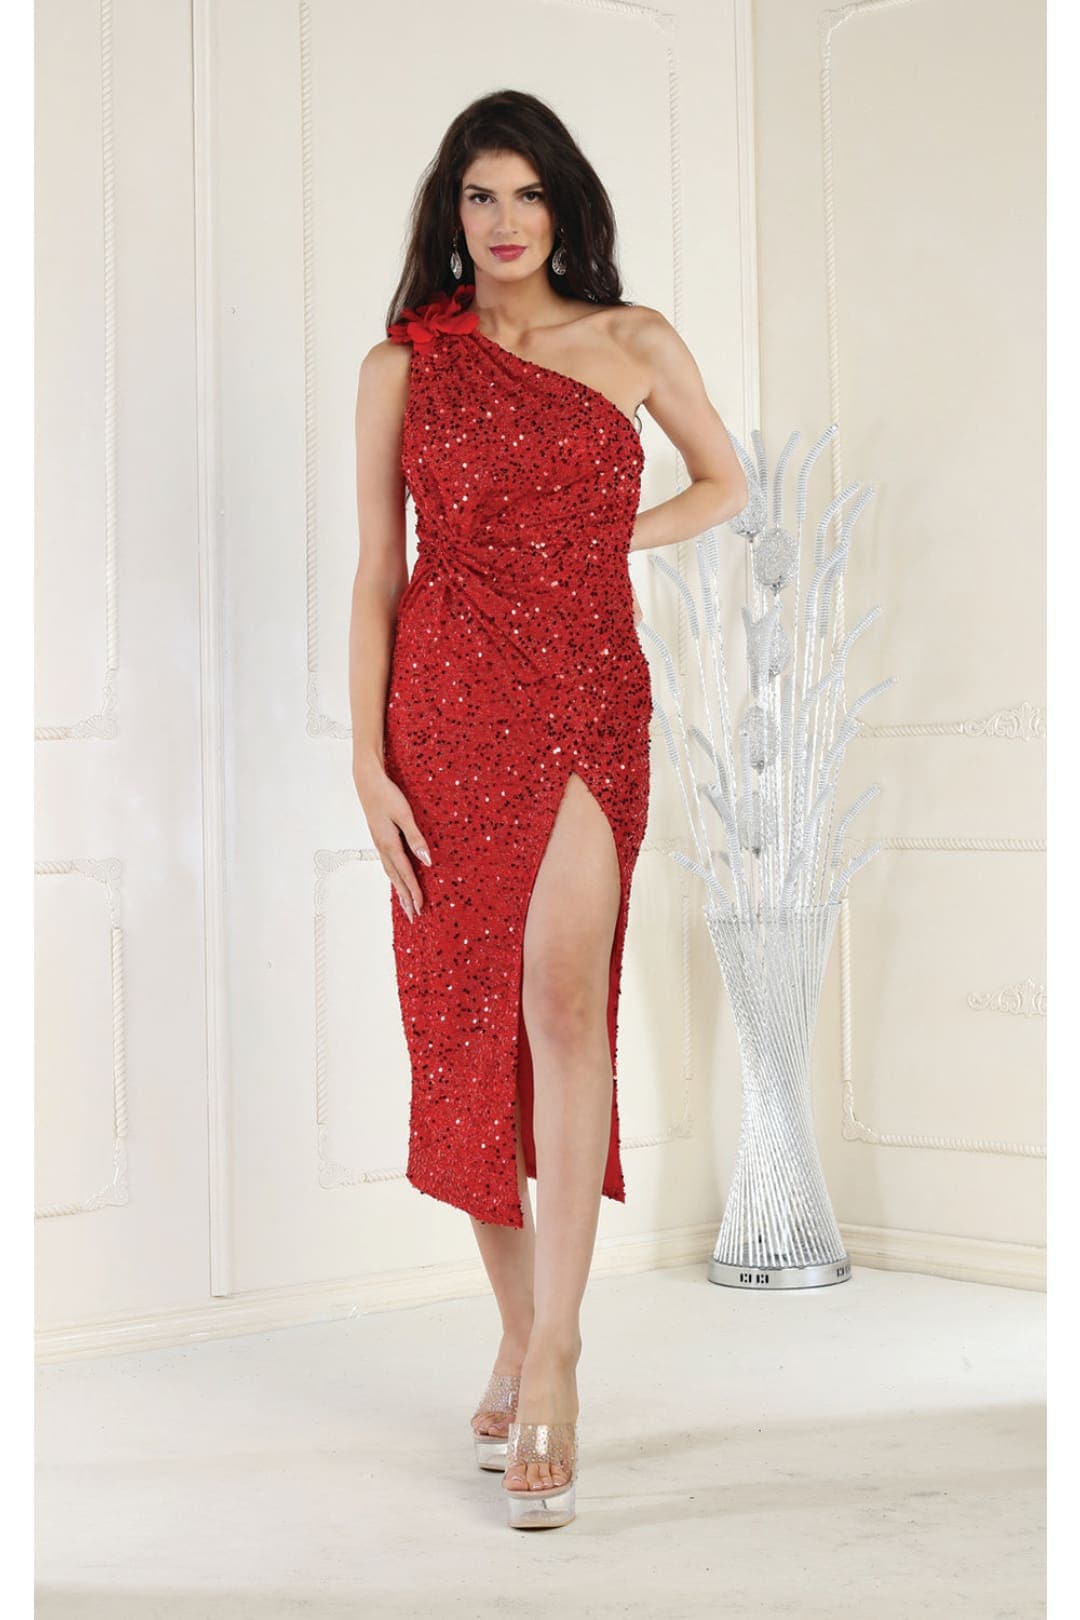 May Queen MQ1967 One Shoulder Sequin Cocktail Dress - RED / 4